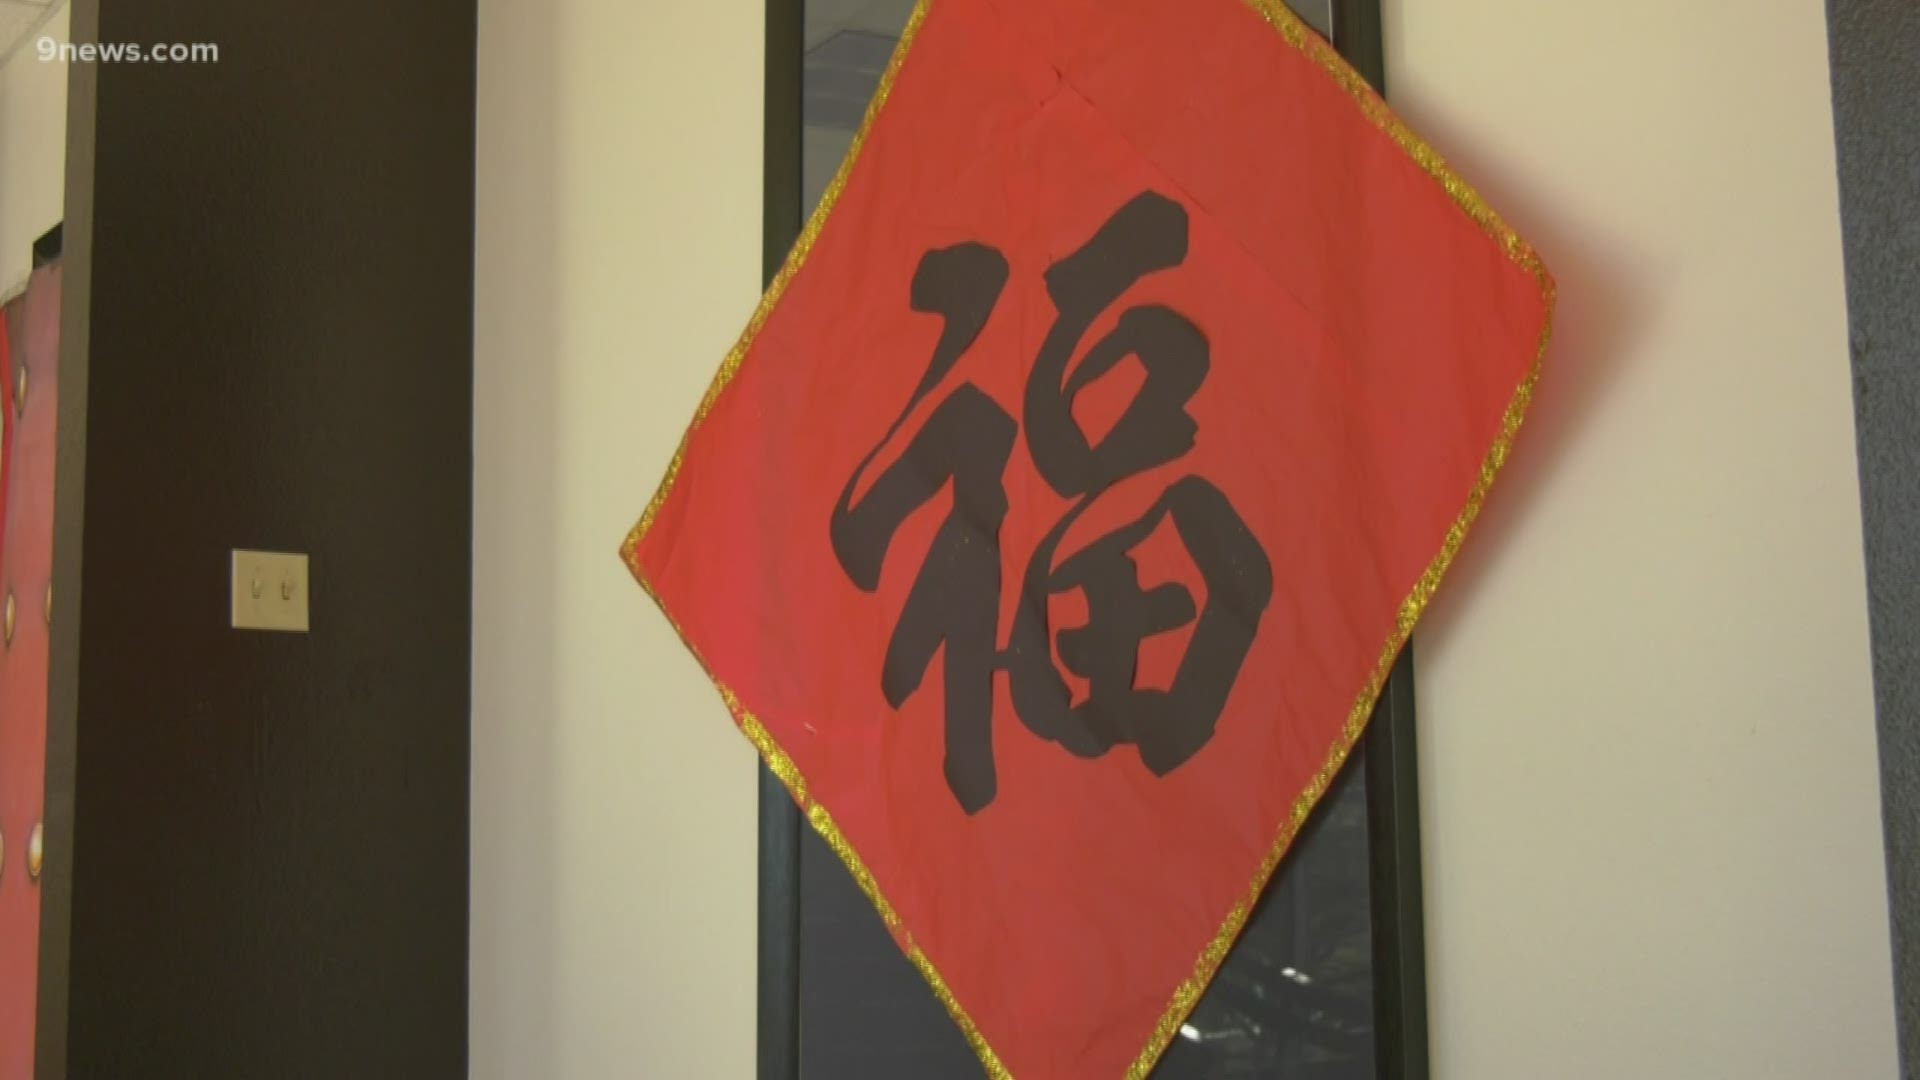 Organizers of Colorado's Chinese New Year Celebration canceled the event Saturday due to fears over coronavirus.